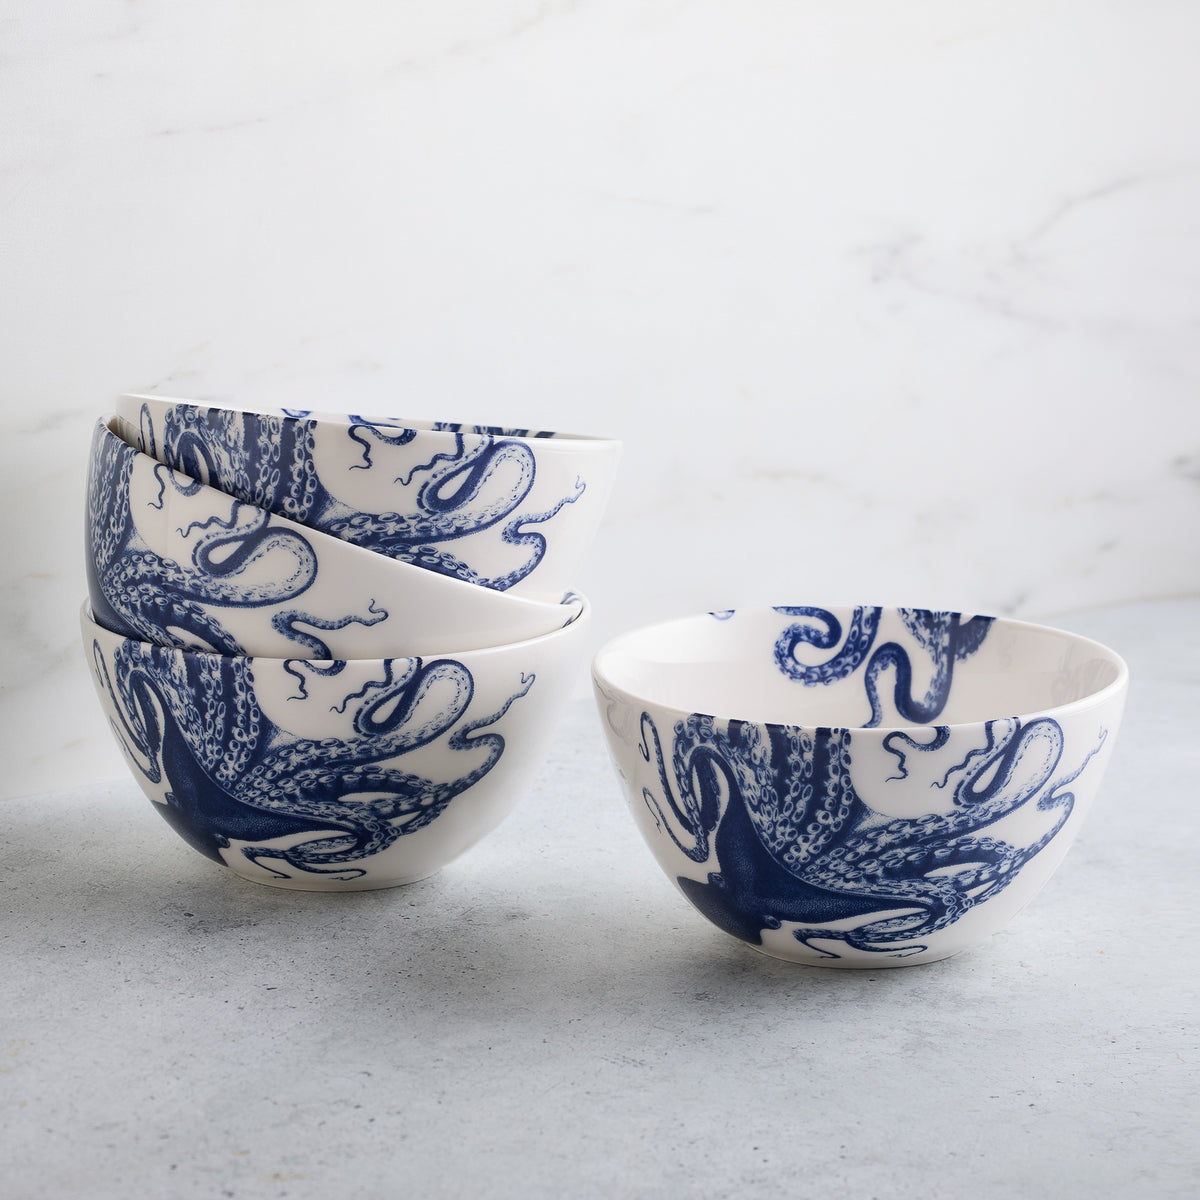 Four Lucy Cereal Bowls by Caskata made from premium porcelain with intricate blue designs. Three are stacked on the left, and one is placed to the right on a grey surface against a marble backdrop. These dishwasher safe bowls are perfect for any meal or decor.